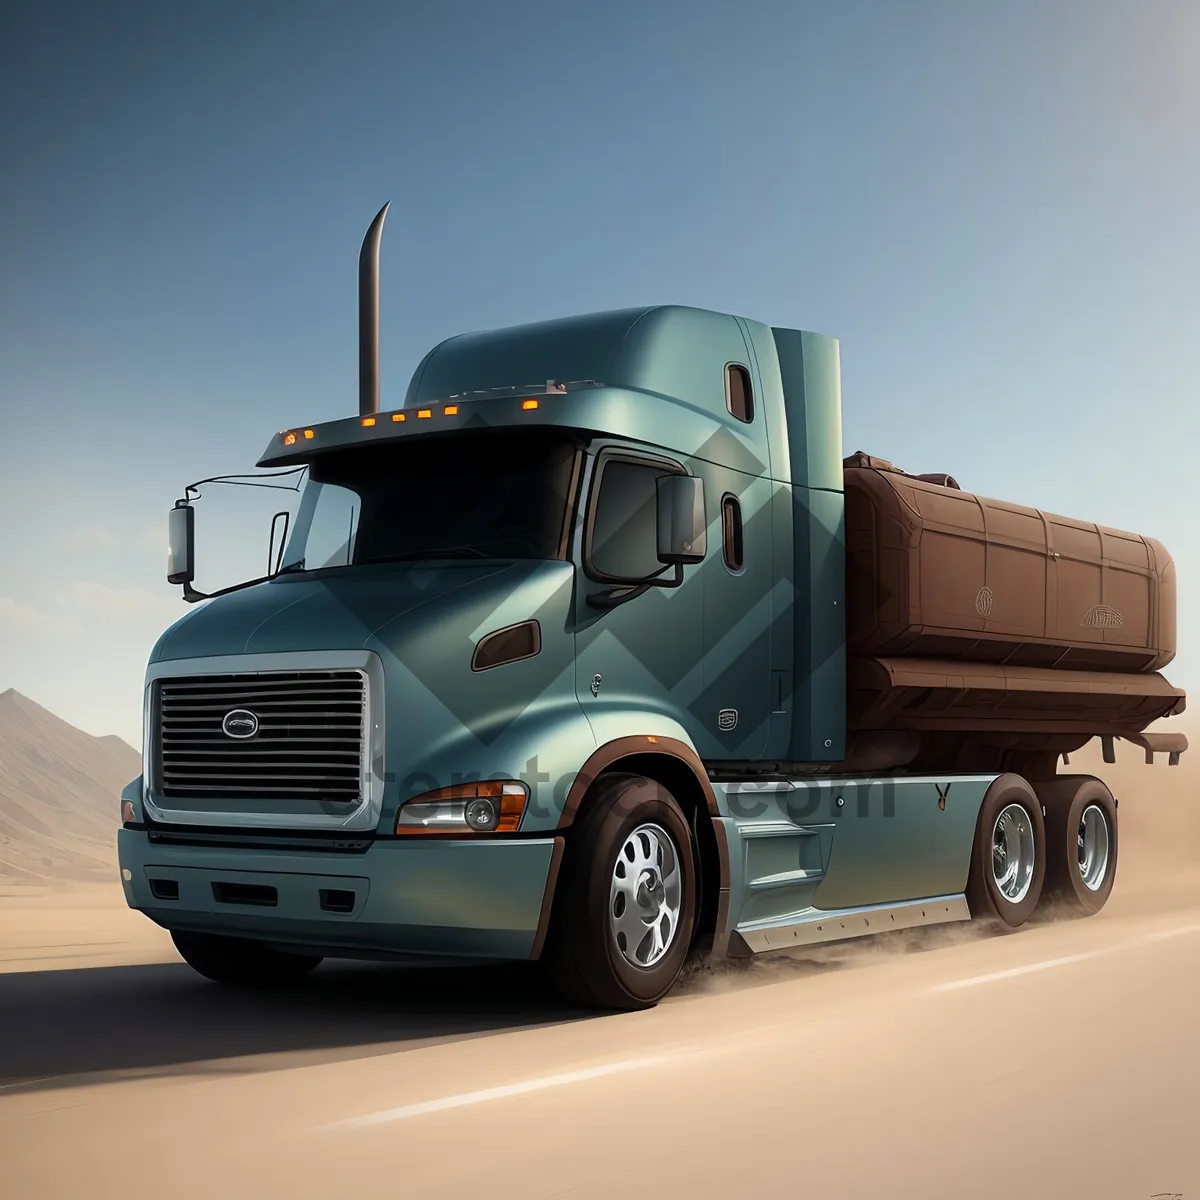 Picture of Highway Hauler: Efficient Freight Transportation on Wheels